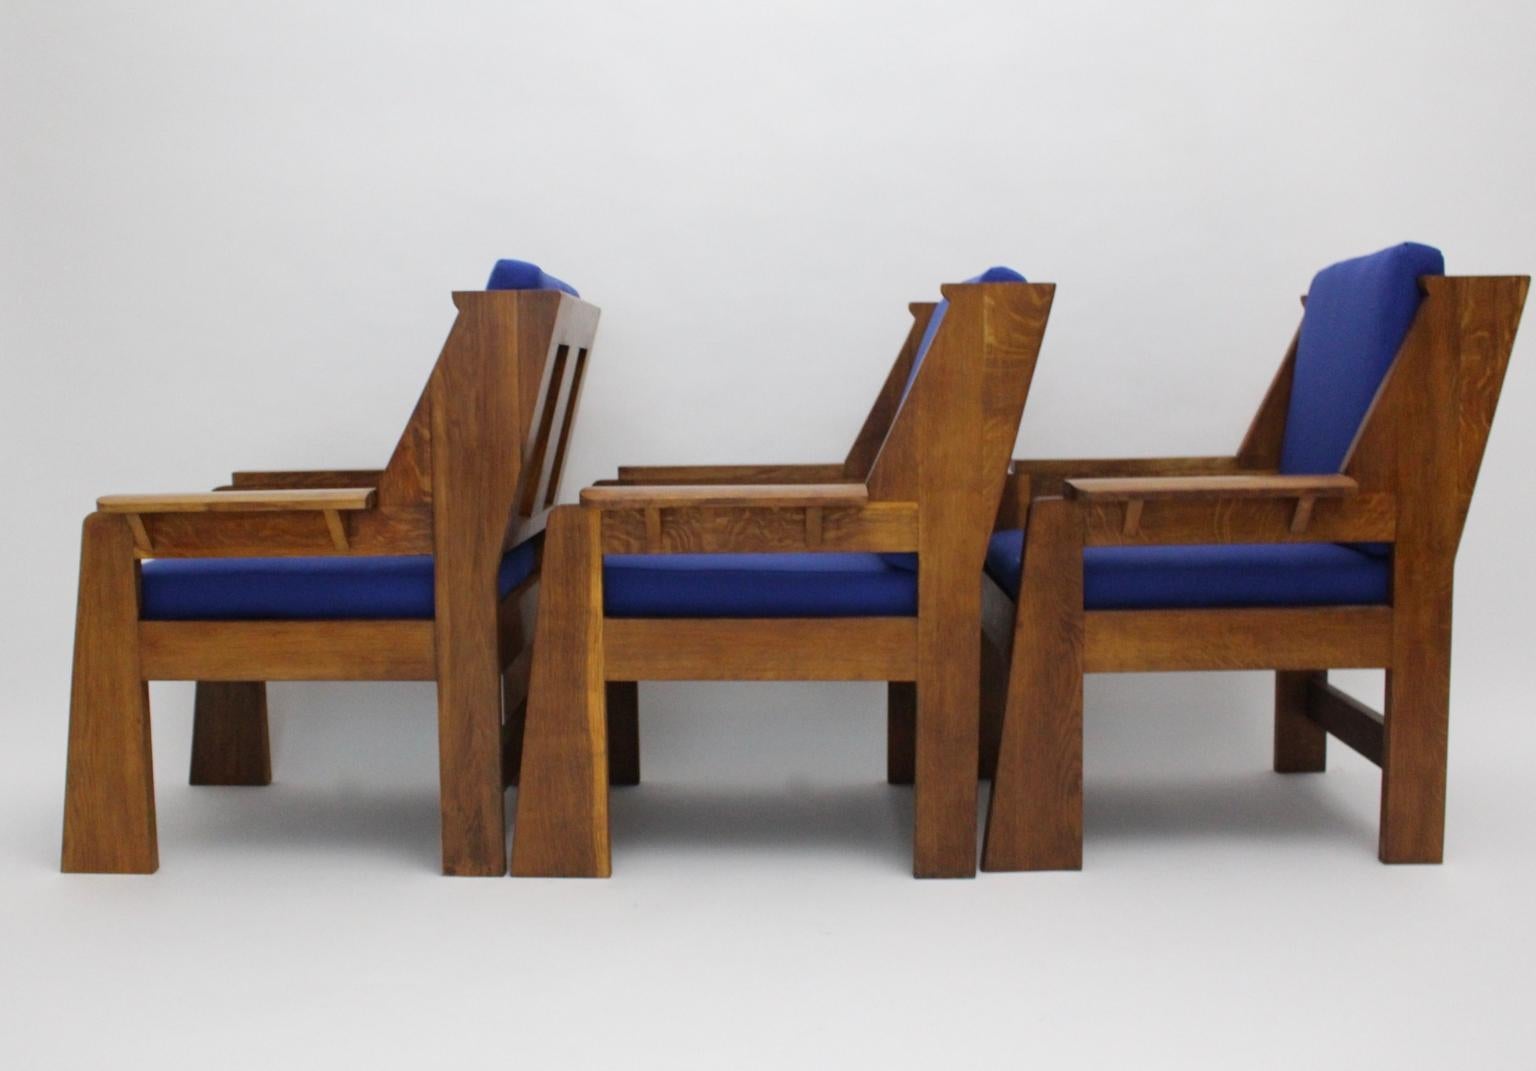 Art Deco Czech Cubism Oak Blue Fabric Vintage Armchairs or Lounge Chairs from solid oakwood 1920s, Czech Republic.
Additionally the loose renewed cushions for seat and back are covered with bold cobalt blue textile fabric.
Also the seat frames are